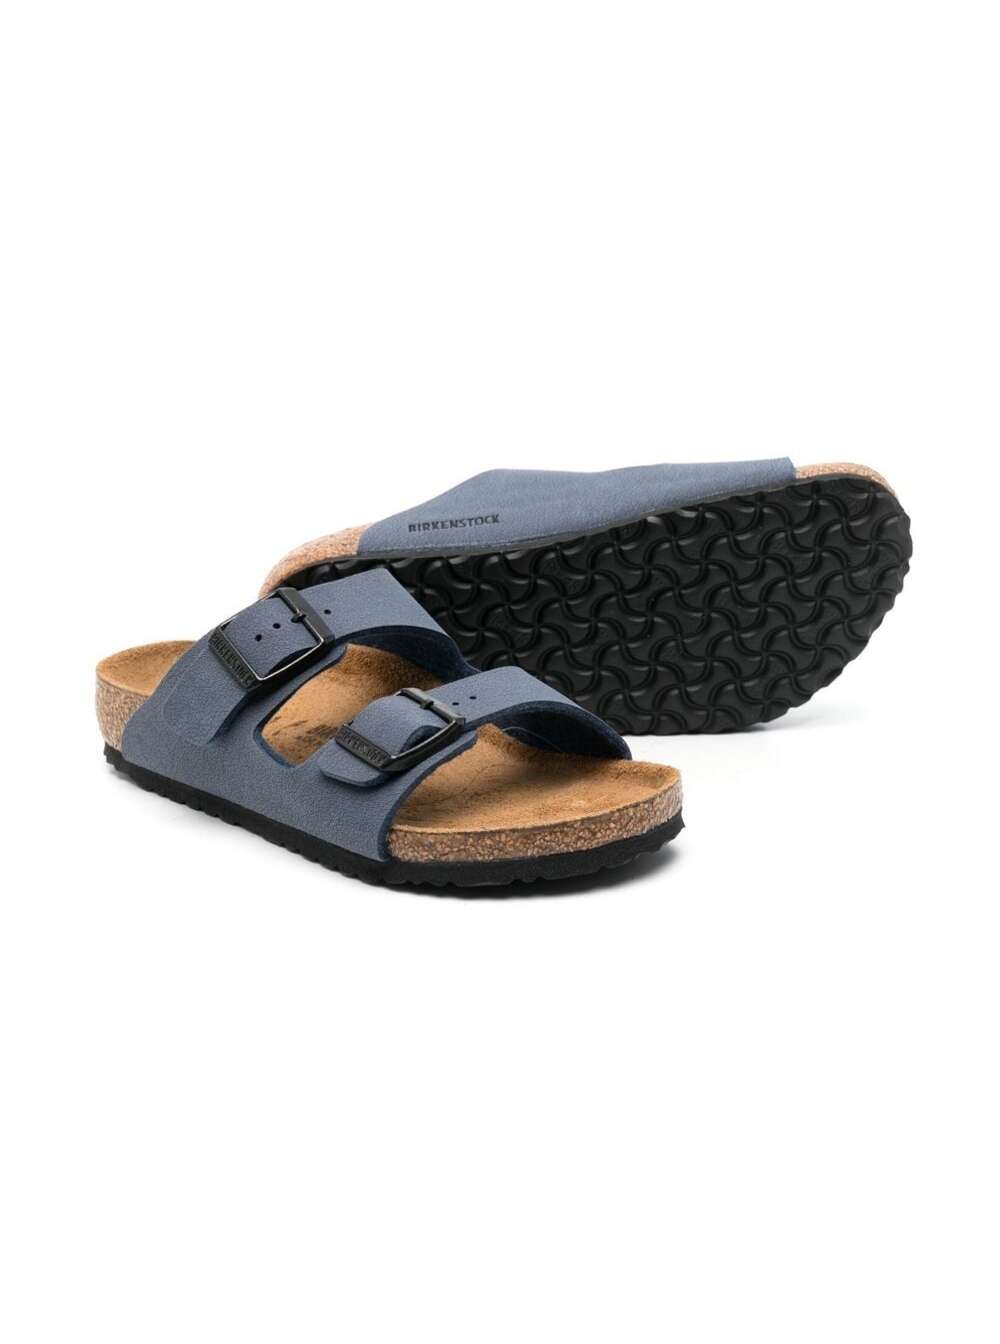 Shop Birkenstock Arizona Navy Blue Sandals With Engraved Logo In Eco Leather Boy